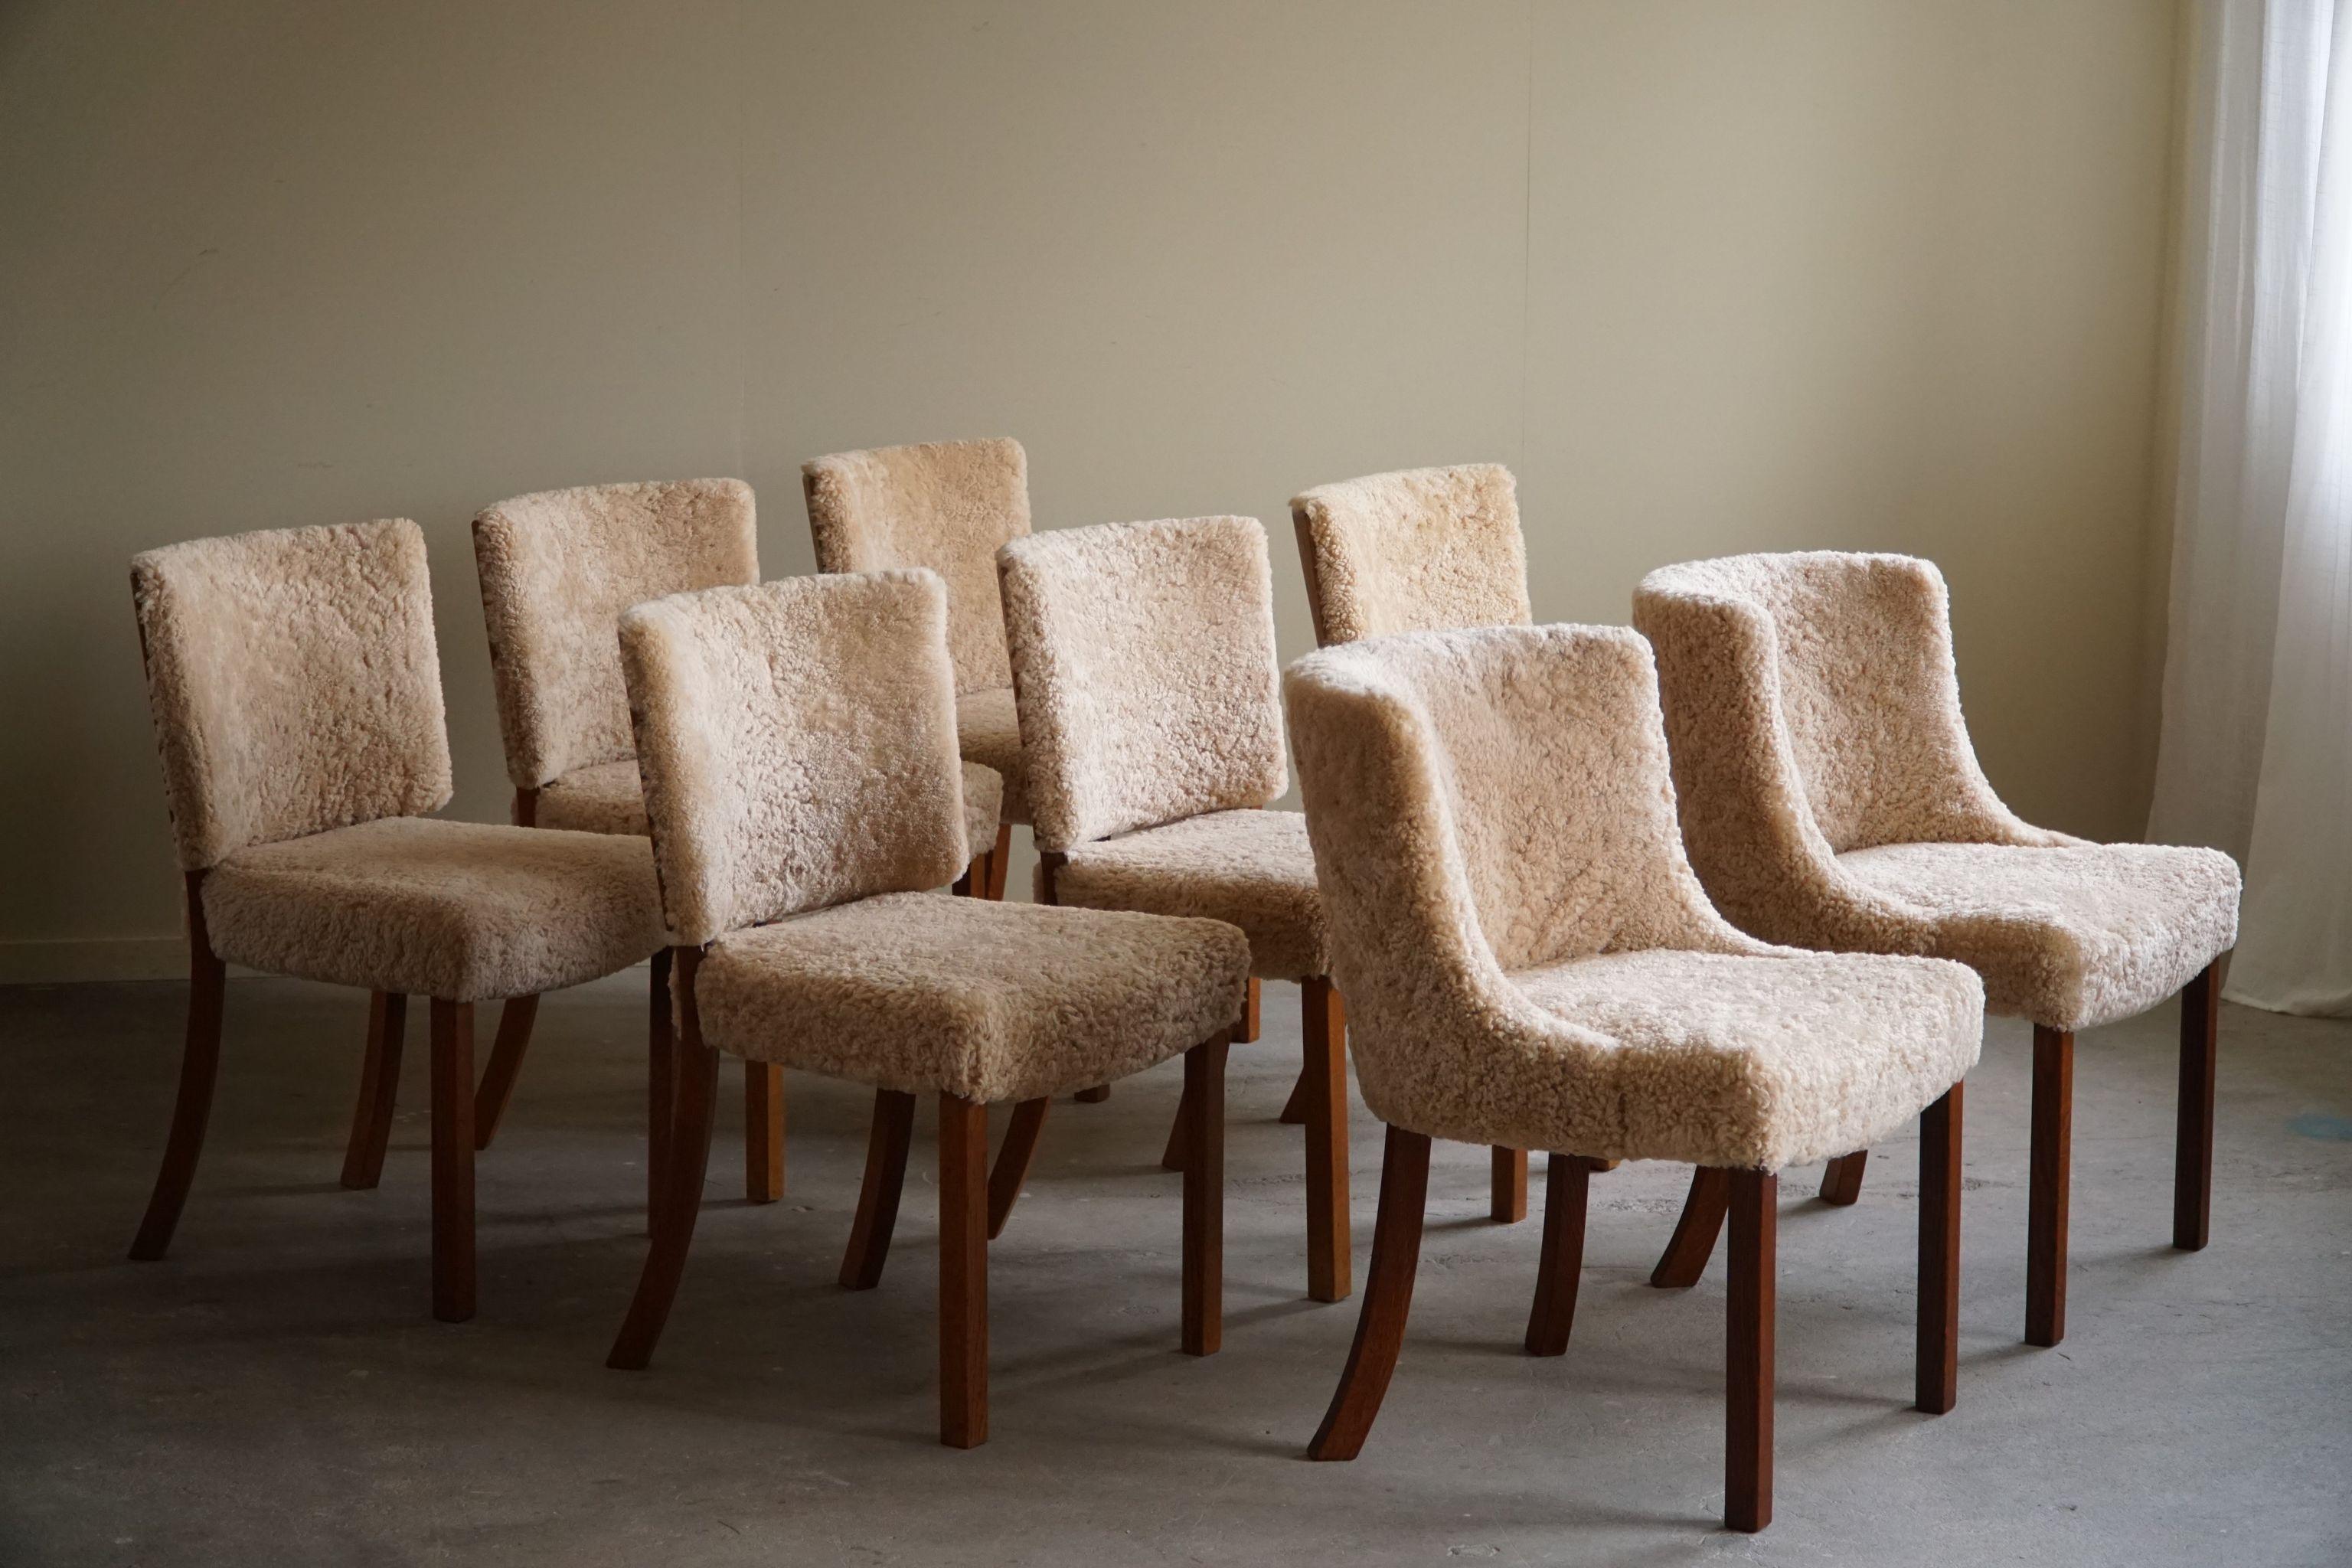 Hand-Crafted A set of 8 Dining Chairs in Oak and Lambswool, Danish Modern, Kaj Gottlob, 1950s For Sale